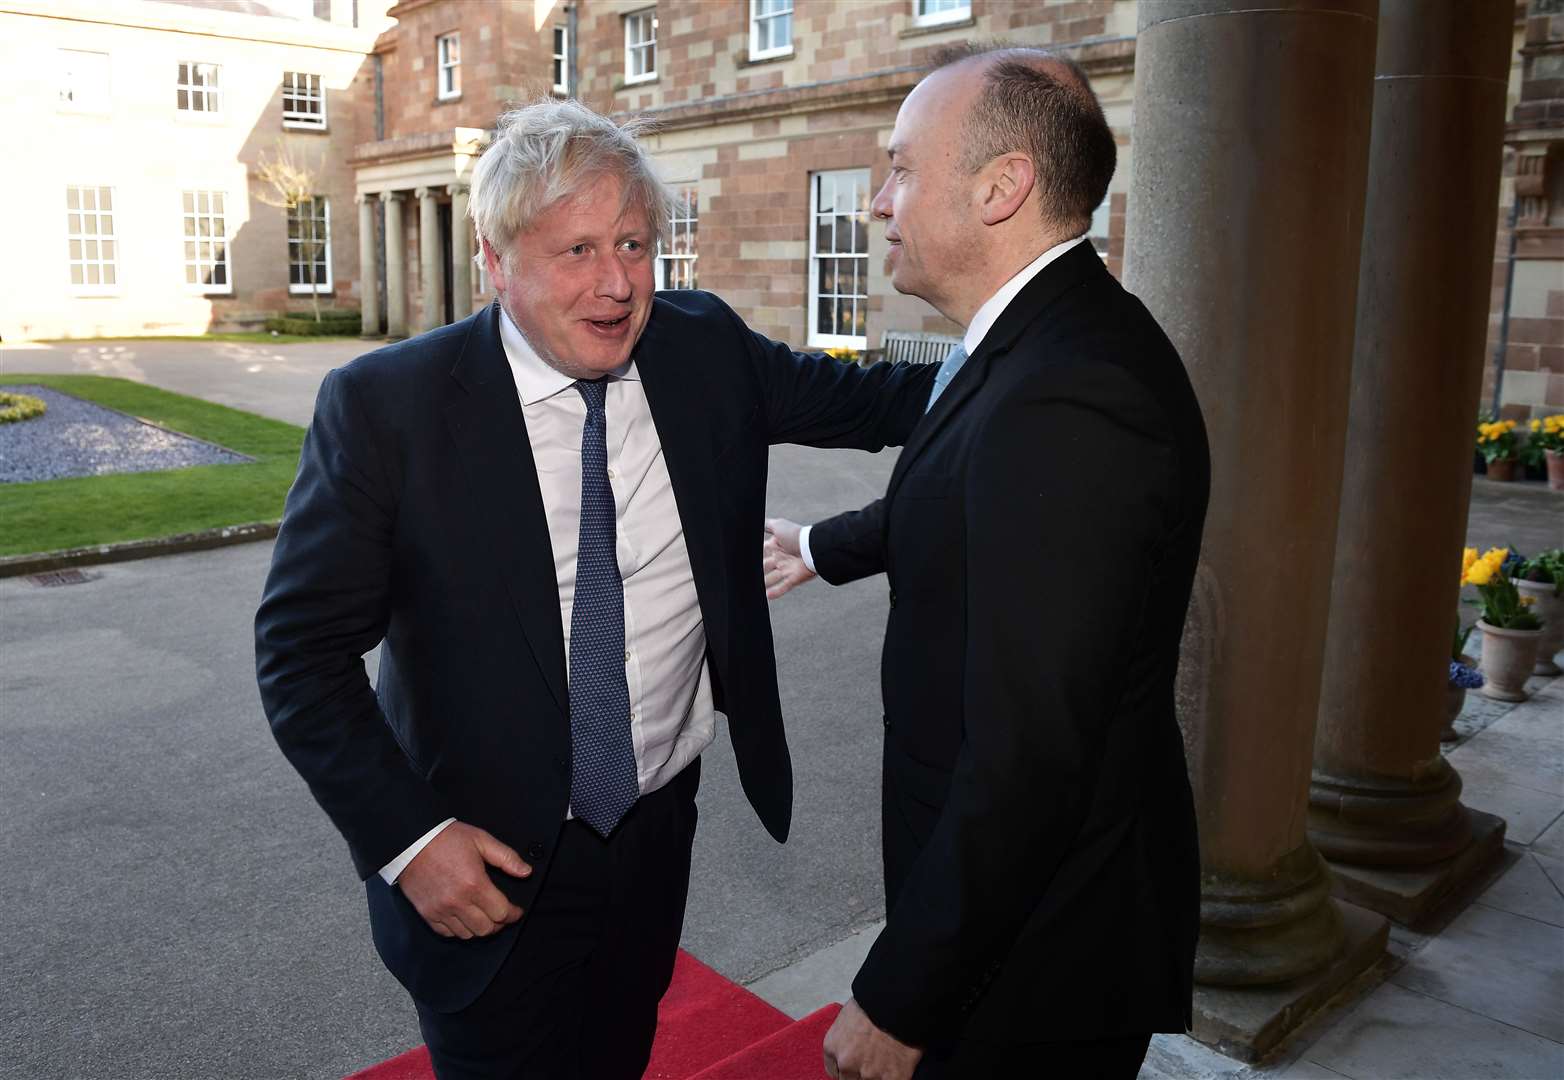 Former prime minister Boris Johnson (left) greets Northern Ireland Secretary Chris Heaton-Harris as they arrive for a gala dinner at Hillsborough Castle, Co Down (Charles McQuillan/PA)